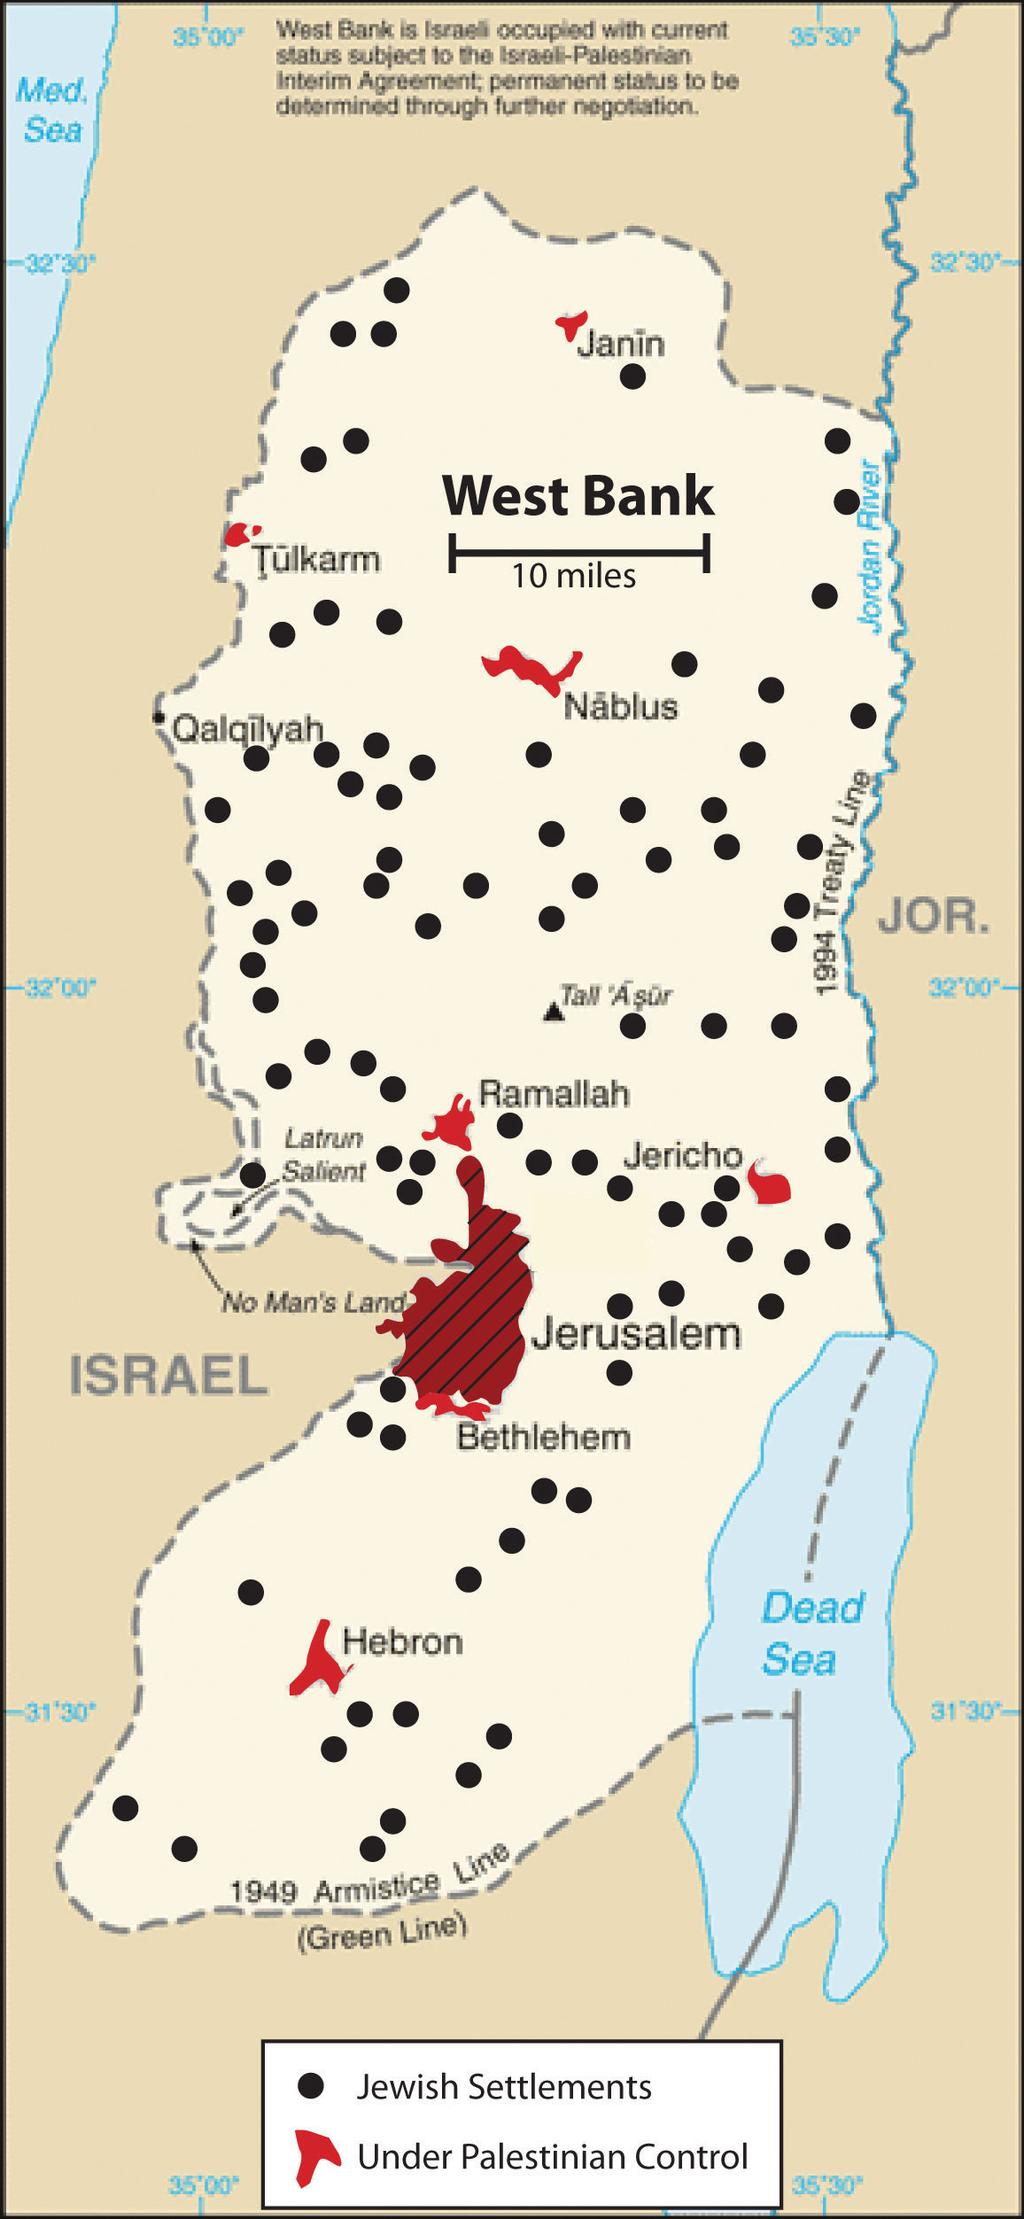 Jordan North of the Arabian Peninsula are three Arab states that surround Israel: Jordan, Syria, and Lebanon. Each country possesses its own unique physical and cultural geography.